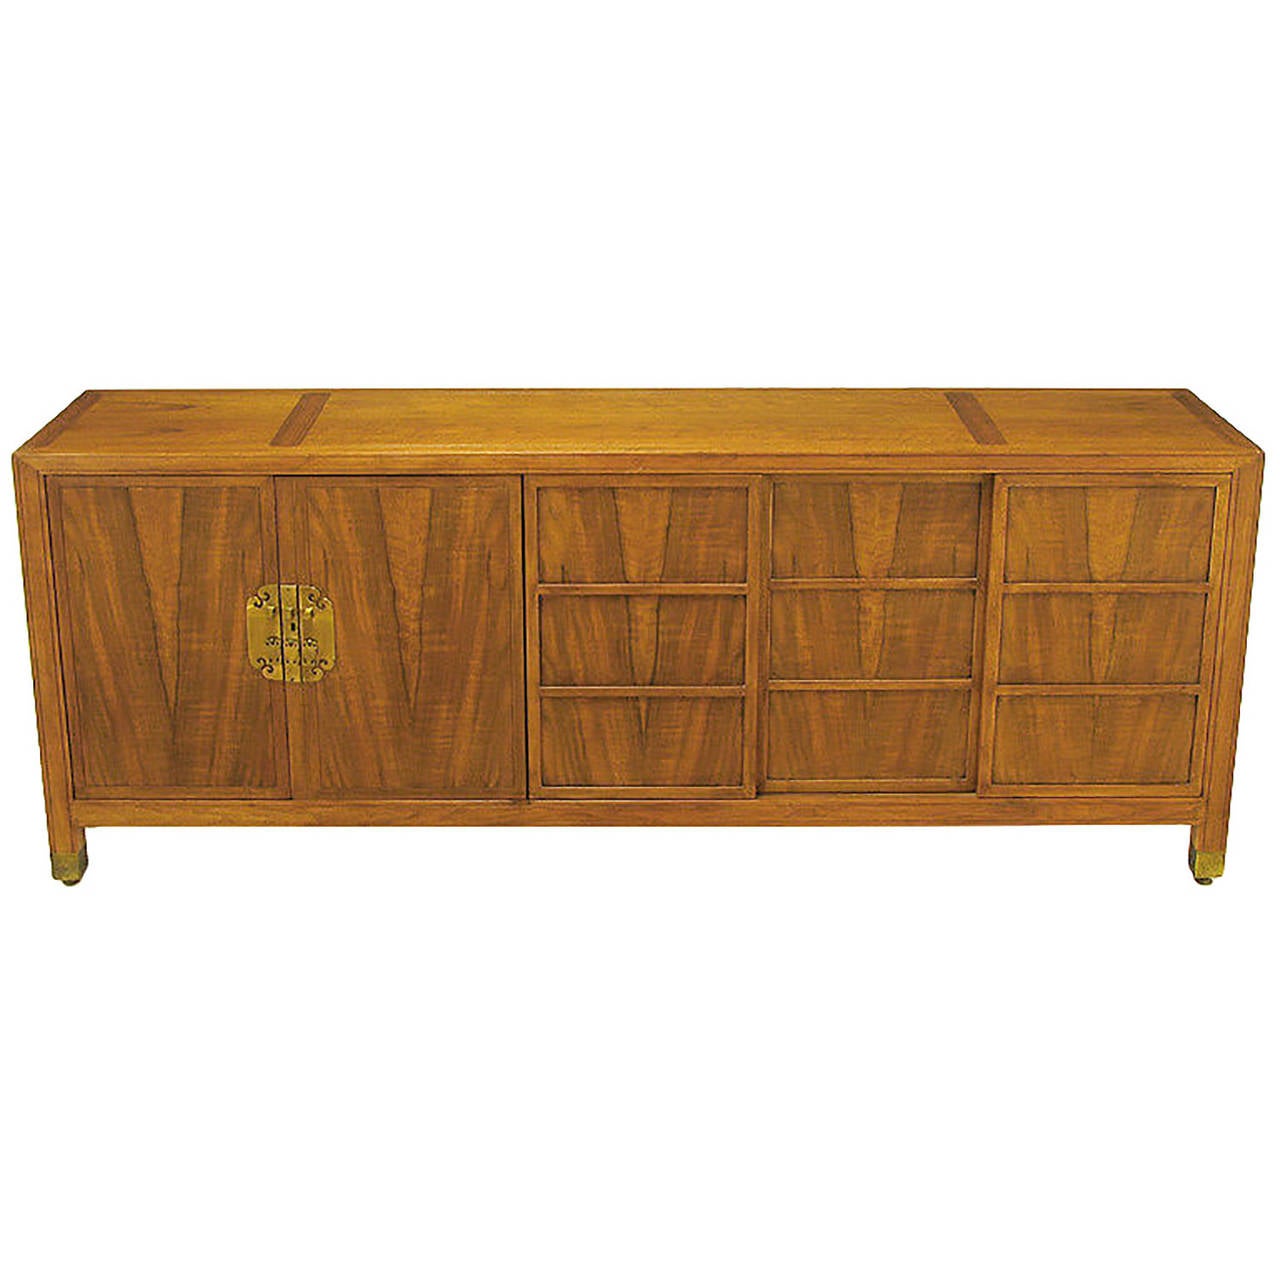 Baker Far East collection figured walnut sideboard. Pair of hinged doors with large solid brass escutcheons open to reveal four drawers. Set of three siding doors with recessed panels move side to side to reveal an open single shelf compartment.